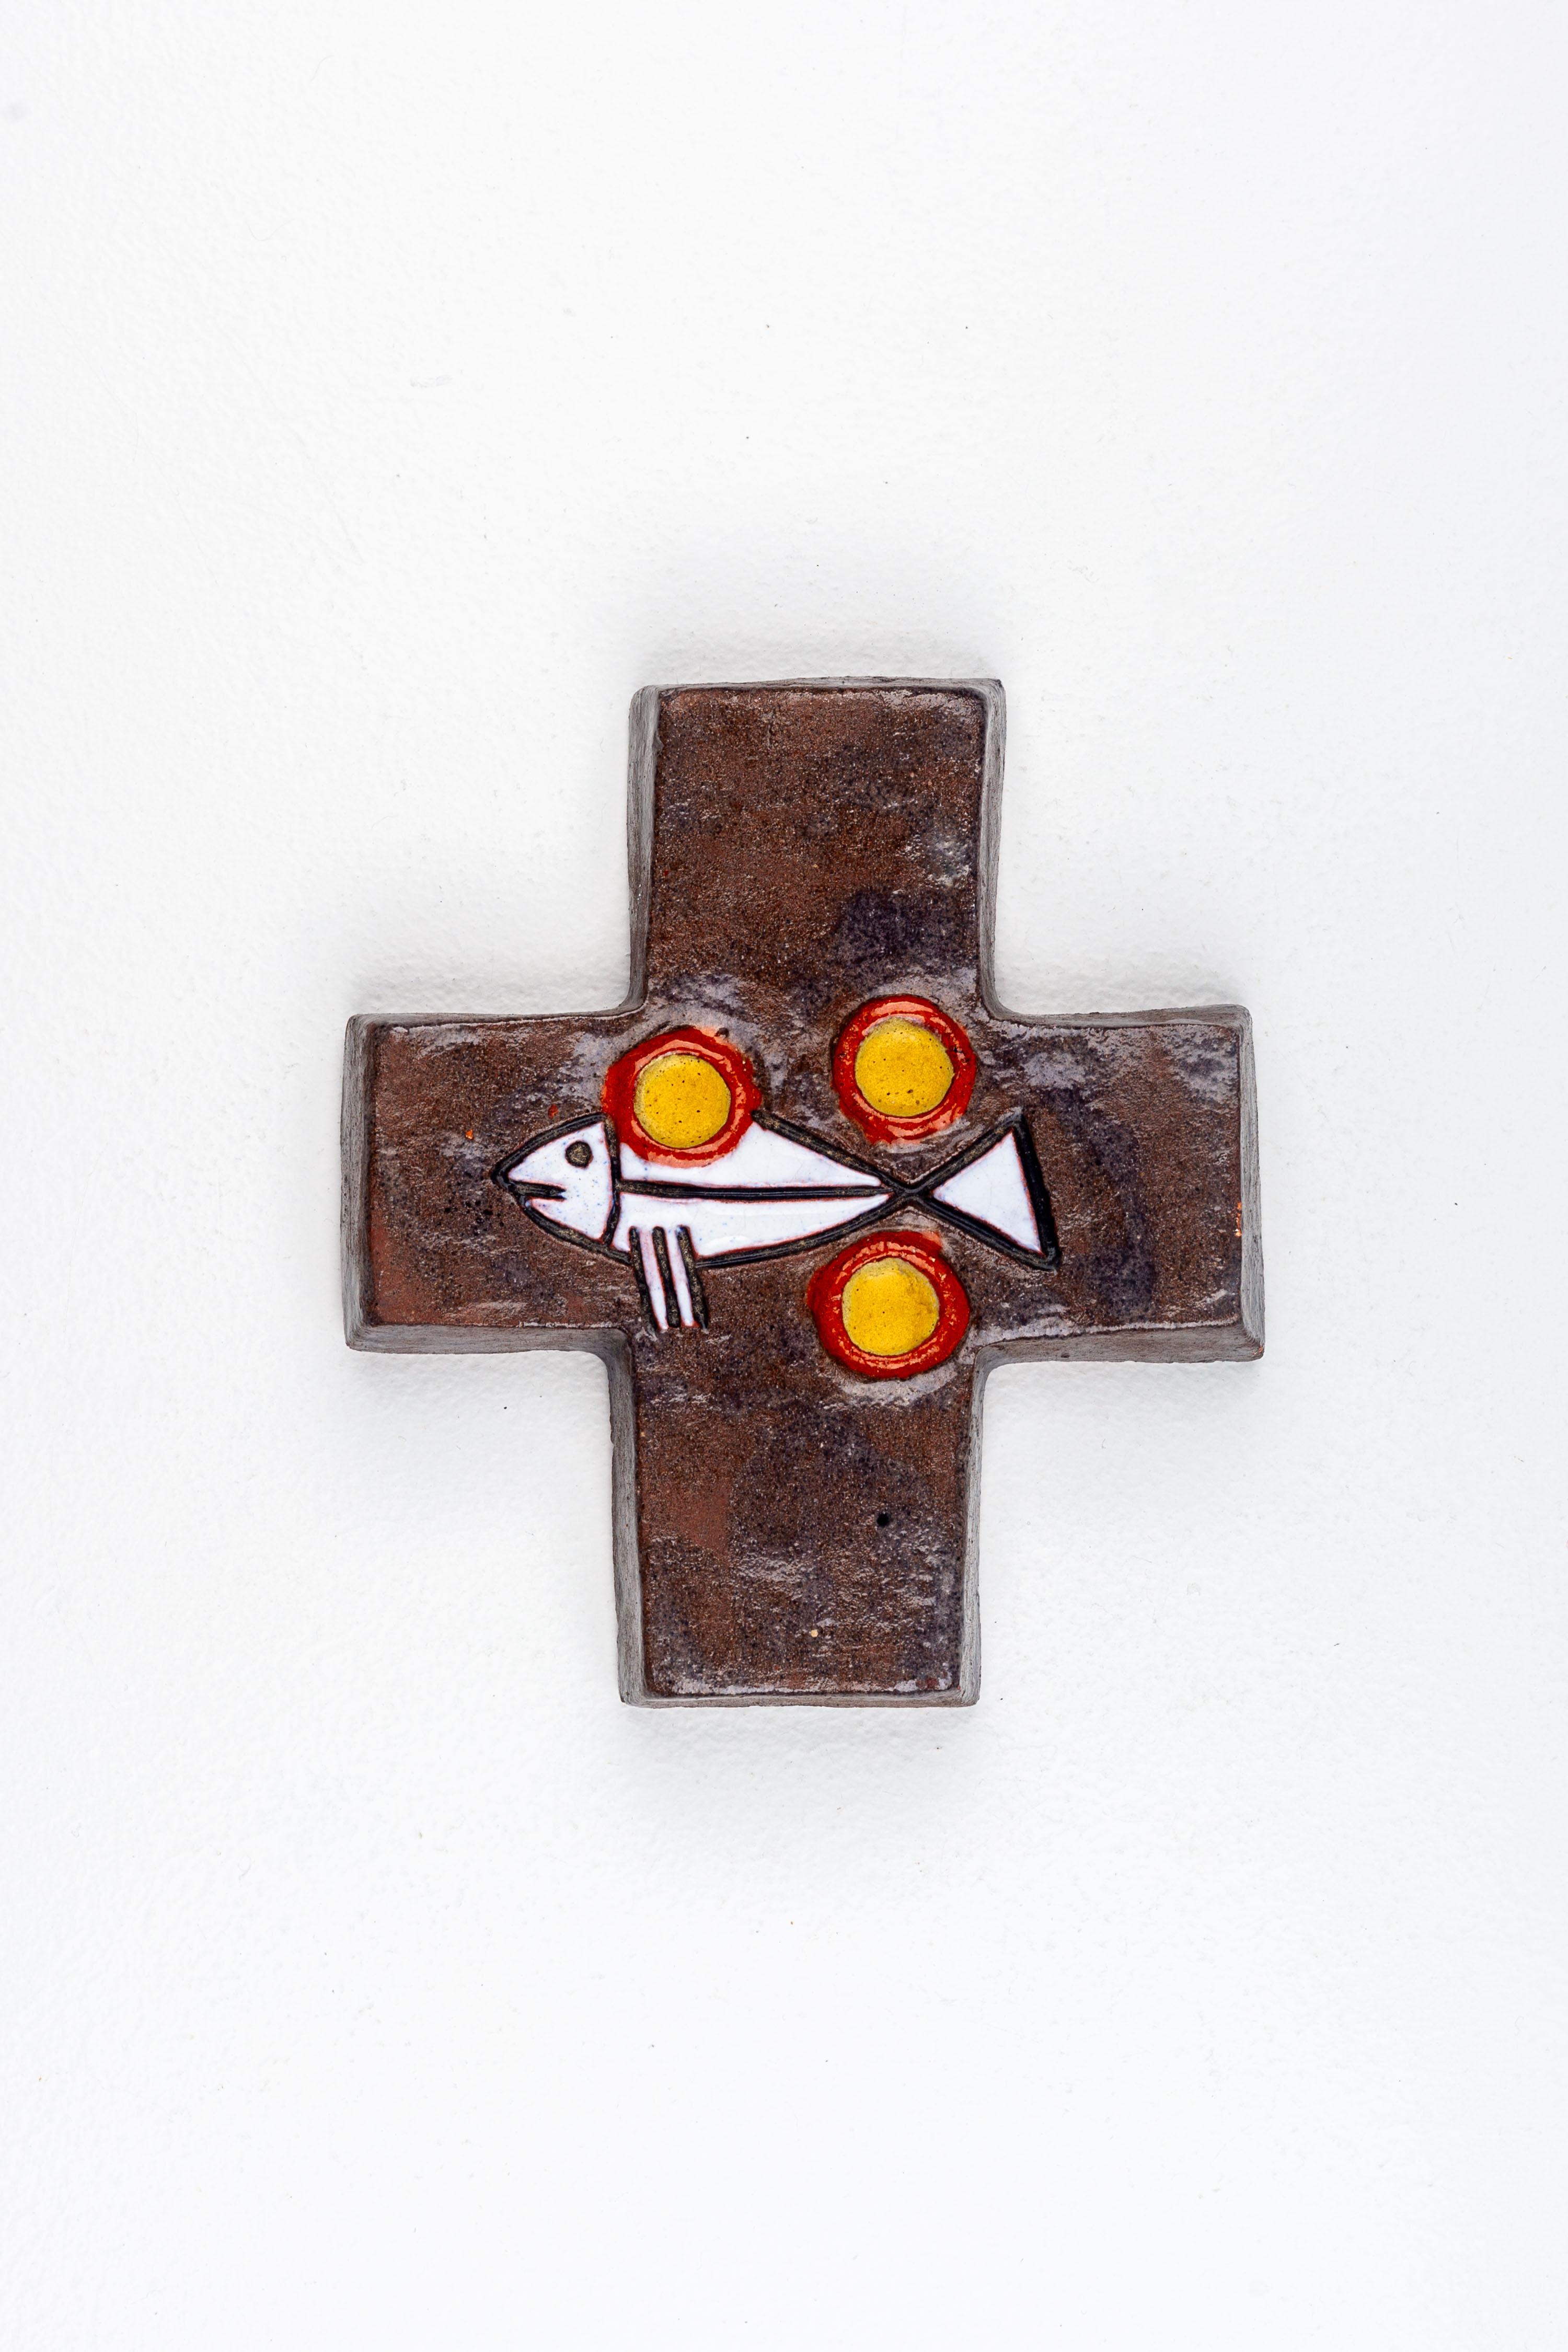 This mid-century modern ceramic cross is a notable piece of religious art that carries the symbolic weight of its imagery through the medium of studio pottery. Handcrafted by European artisans, it is characterized by a tactile surface finished in a